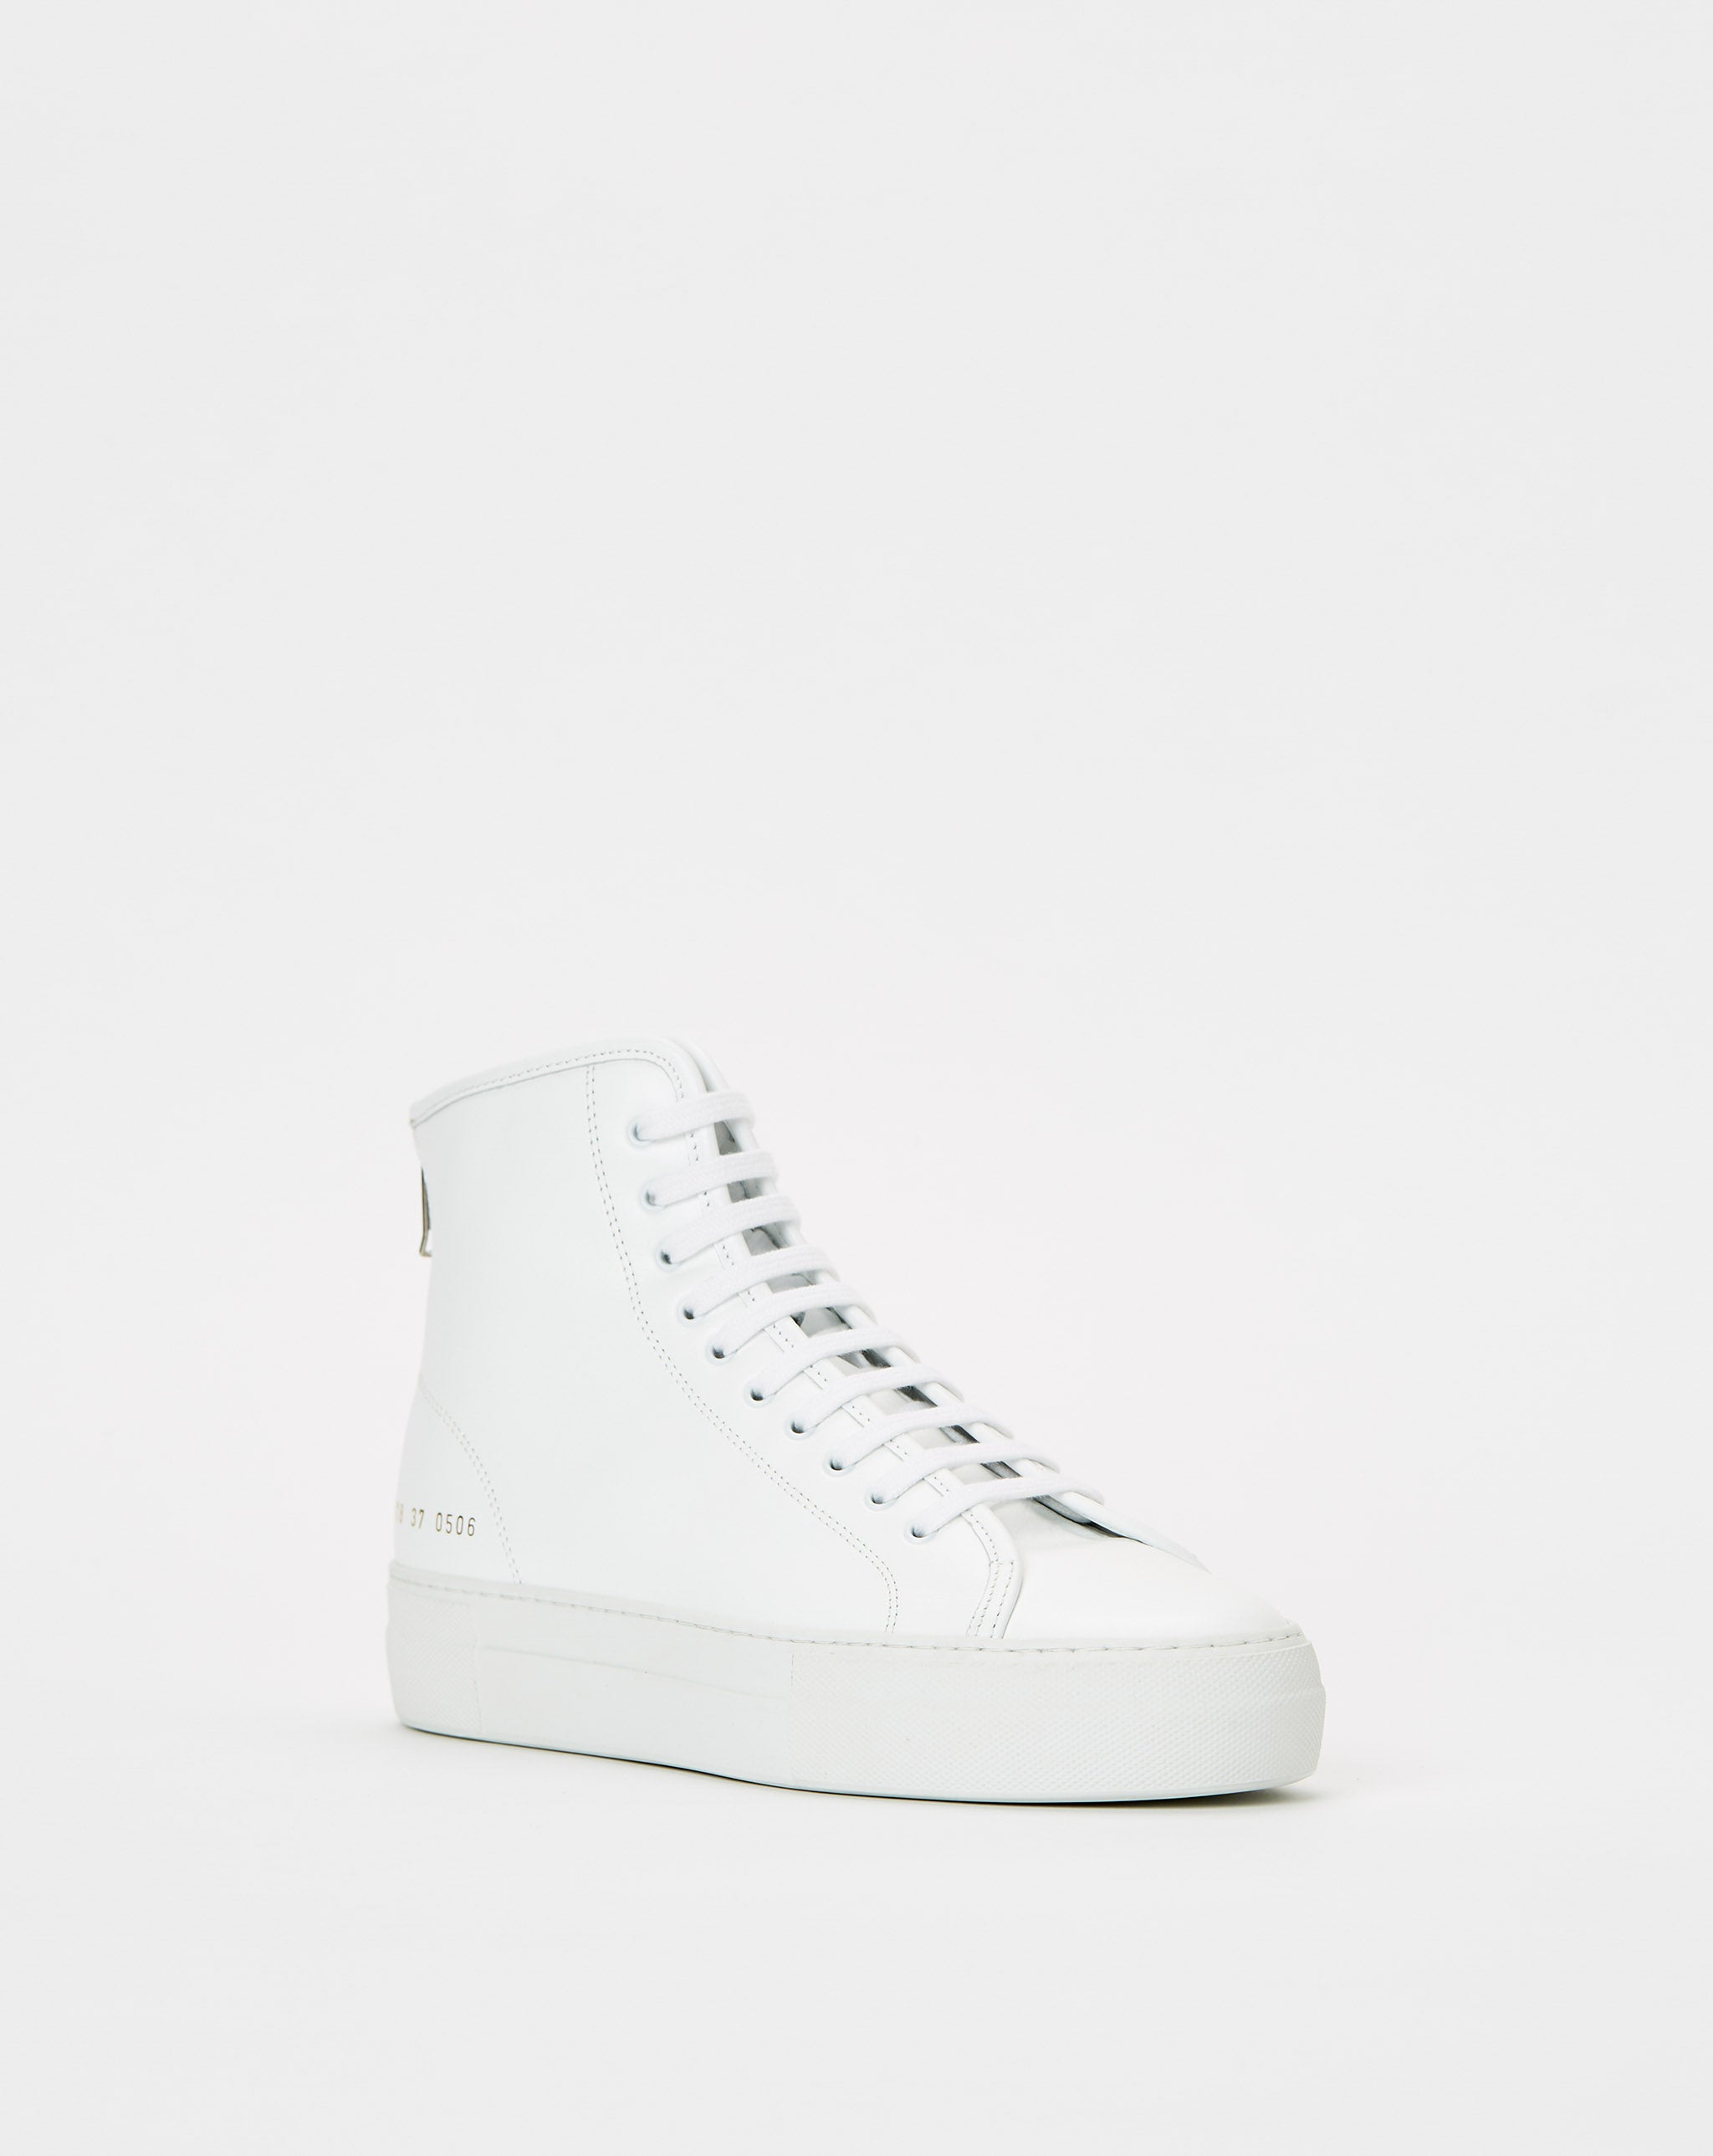 Common Projects Tournament High Super Leather  - Cheap Cerbe Jordan outlet